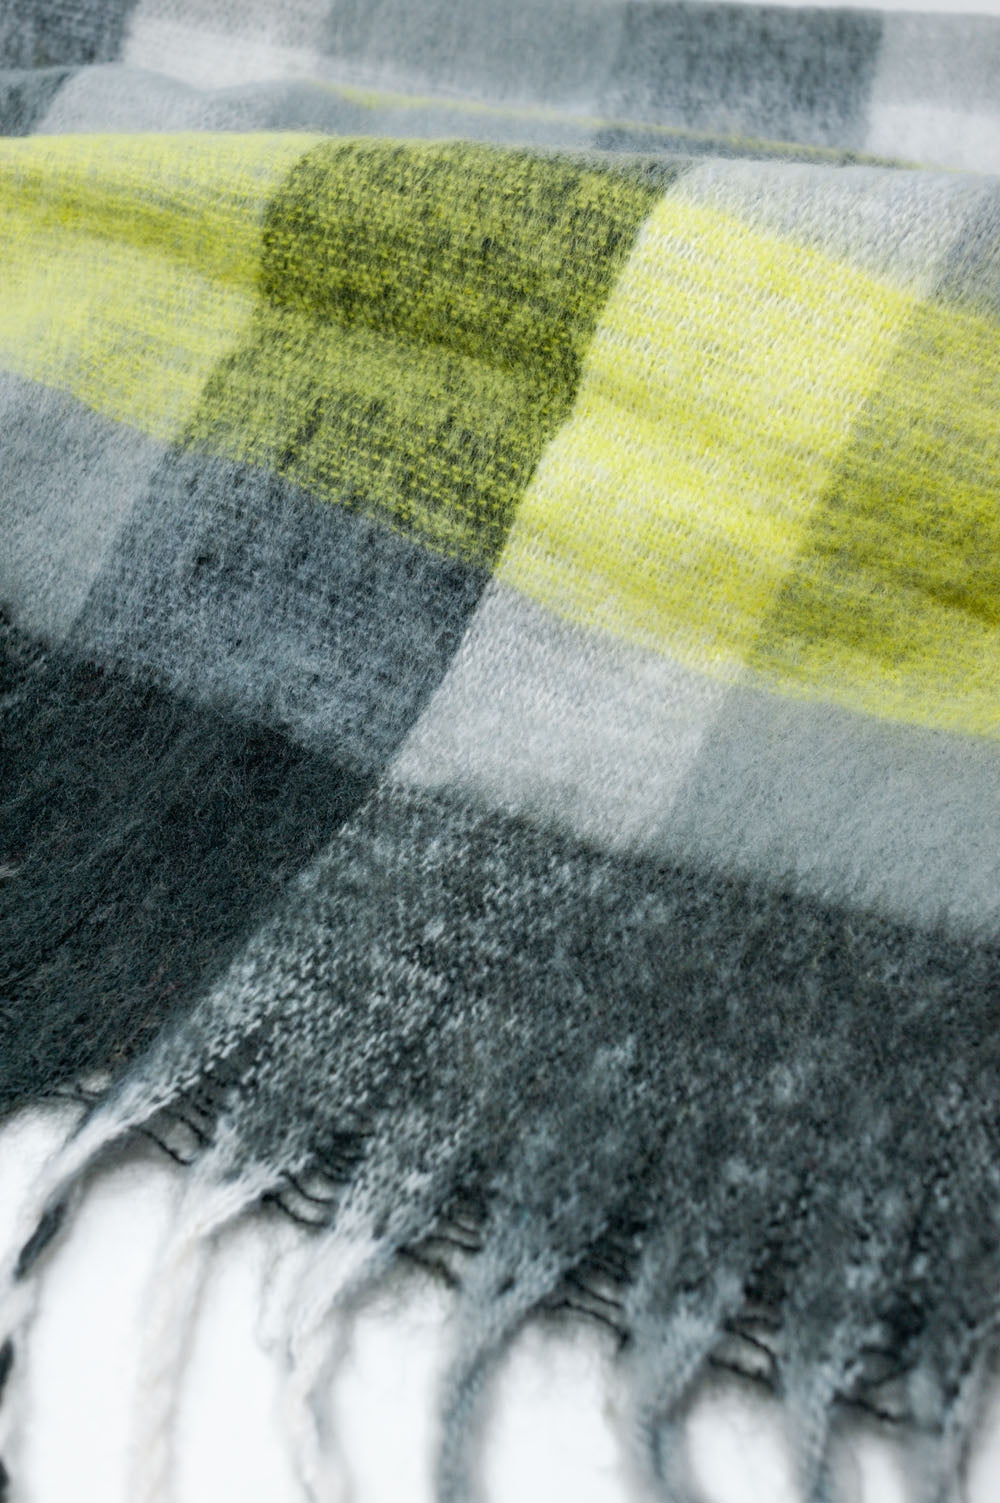 Brushed fringed scarf in grey check Szua Store